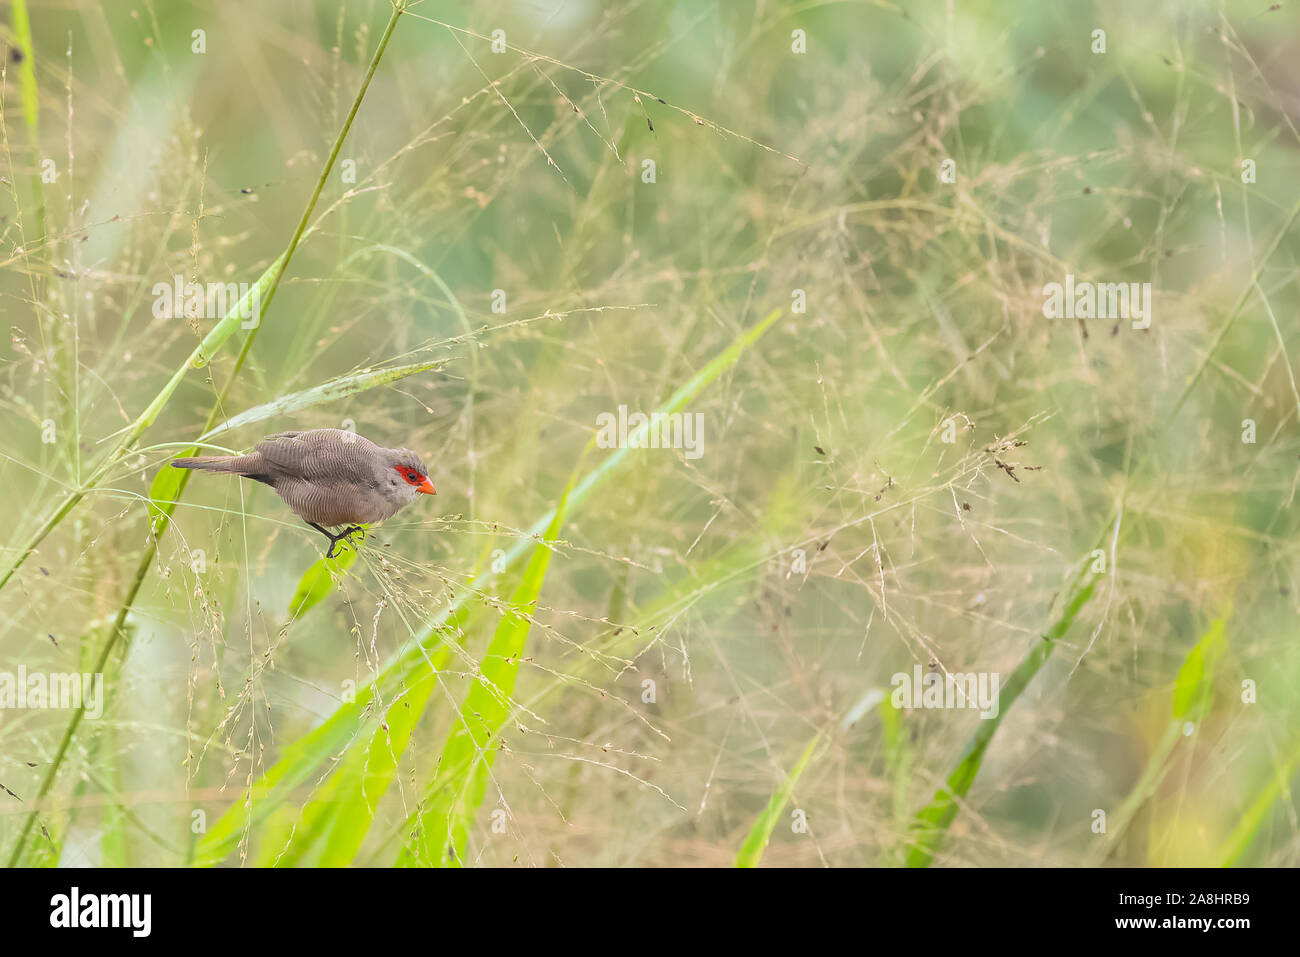 Common Waxbill, Estrilda astrid, two tropical birds in Sao Tome and Principe, african birds with a red beak Stock Photo